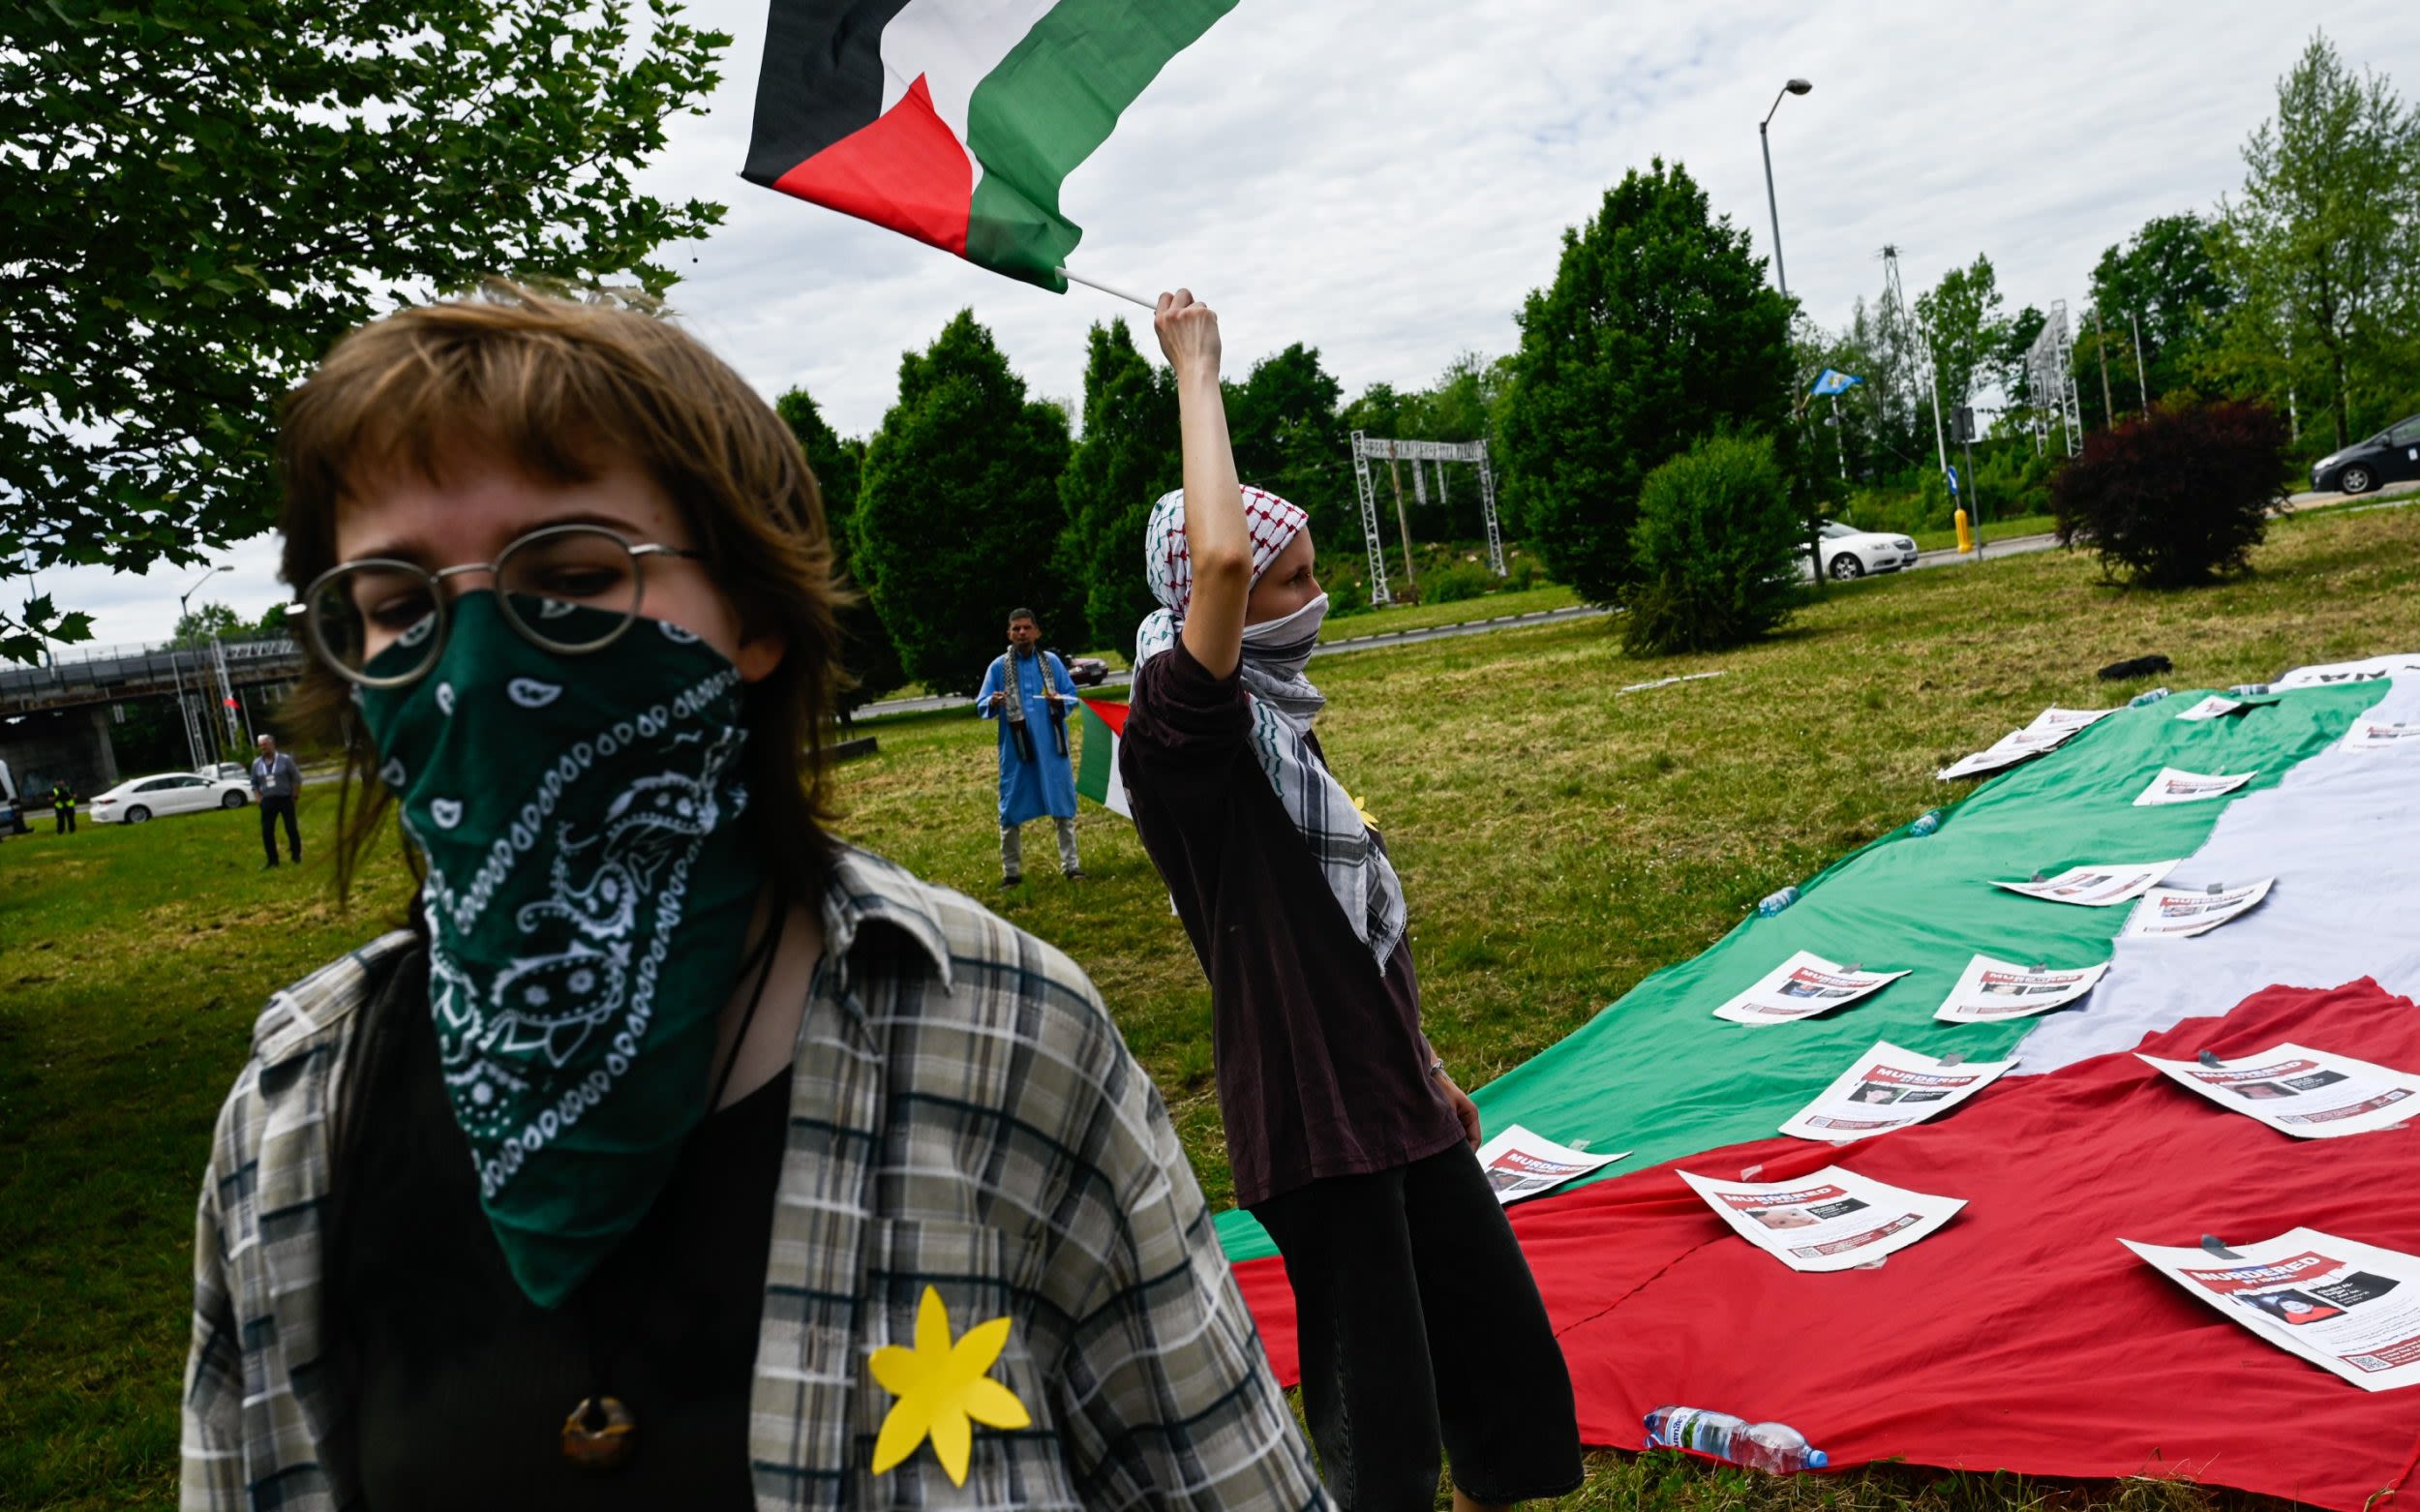 Pro-Palestinian protesters disrupt Auschwitz remembrance march